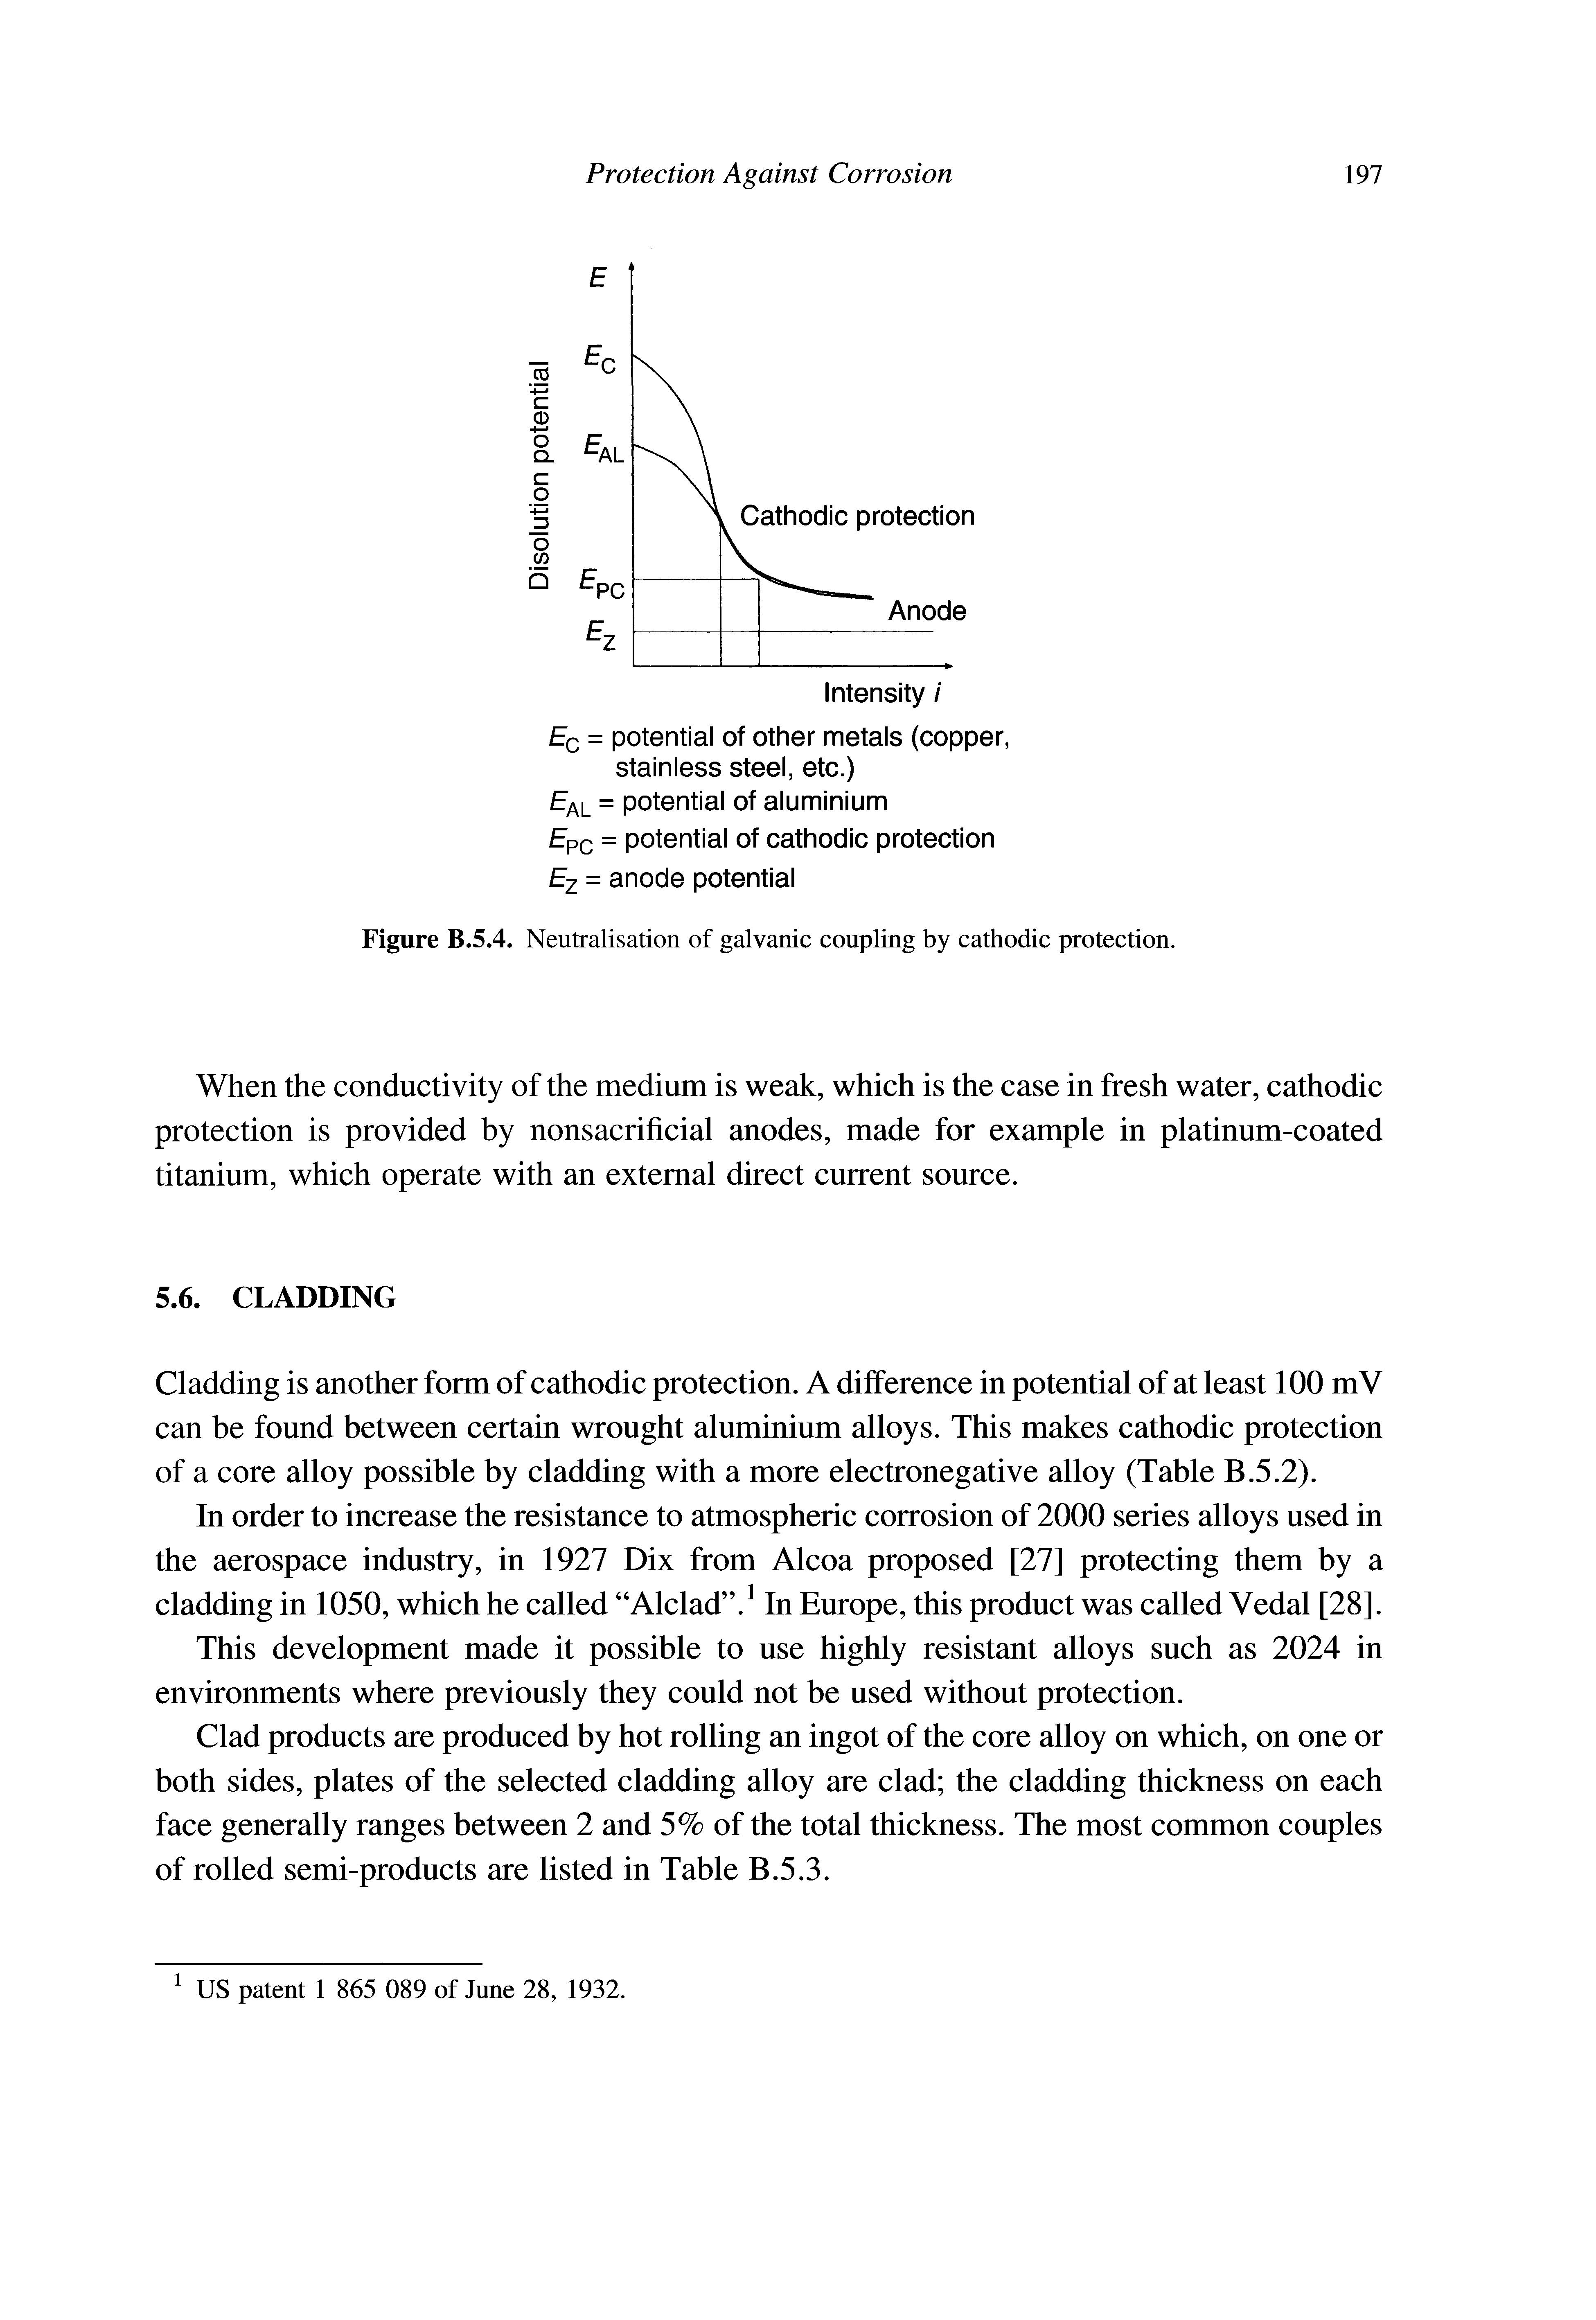 Figure B.5.4. Neutralisation of galvanic coupling by cathodic protection.